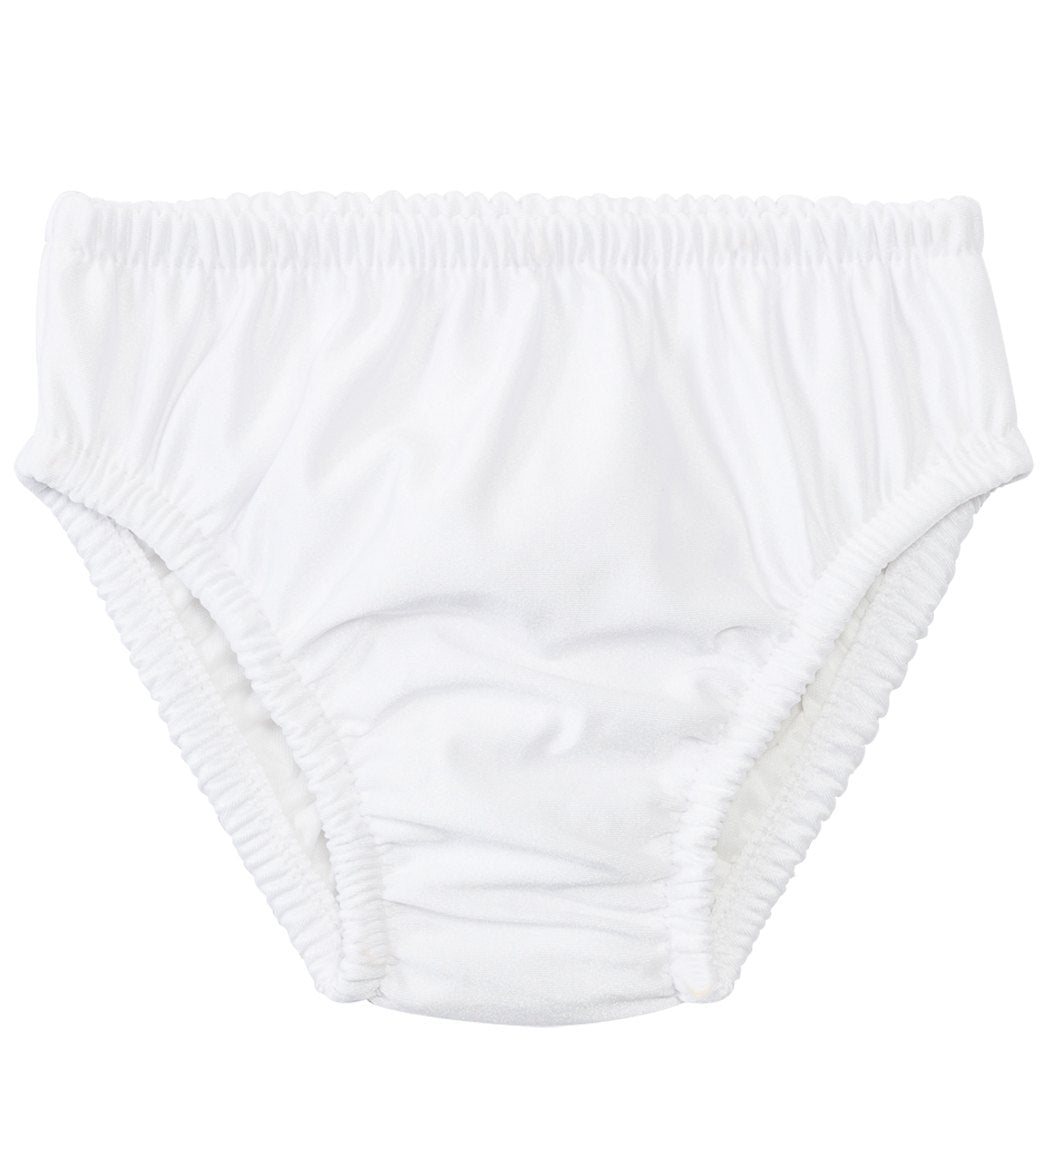 My Pool Pal Swimster - White 18 Months Nylon/Polyester/Spandex - Swimoutlet.com